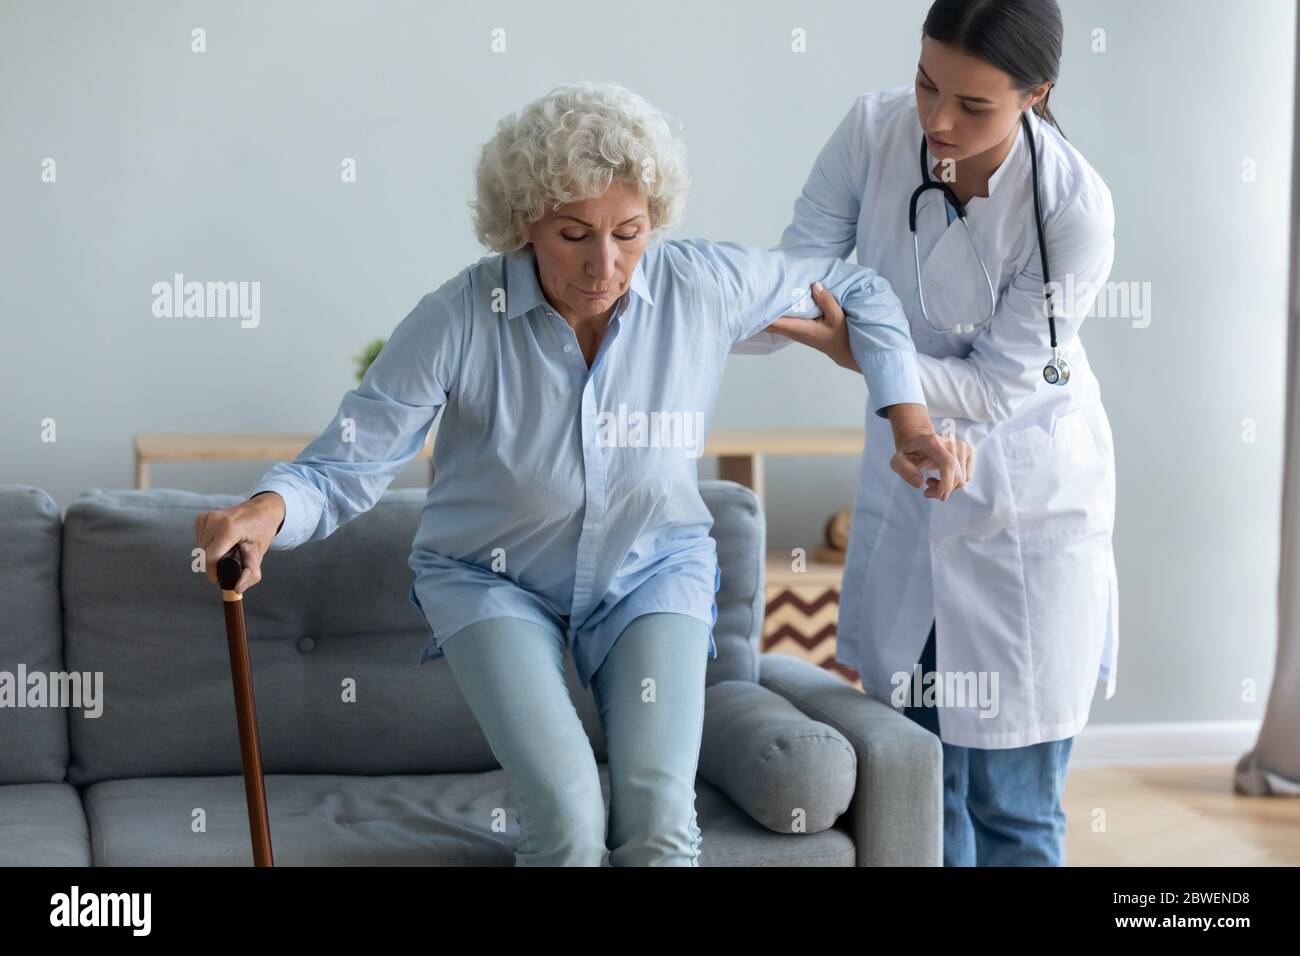 Caring nurse helping to elderly woman get off the couch Stock Photo